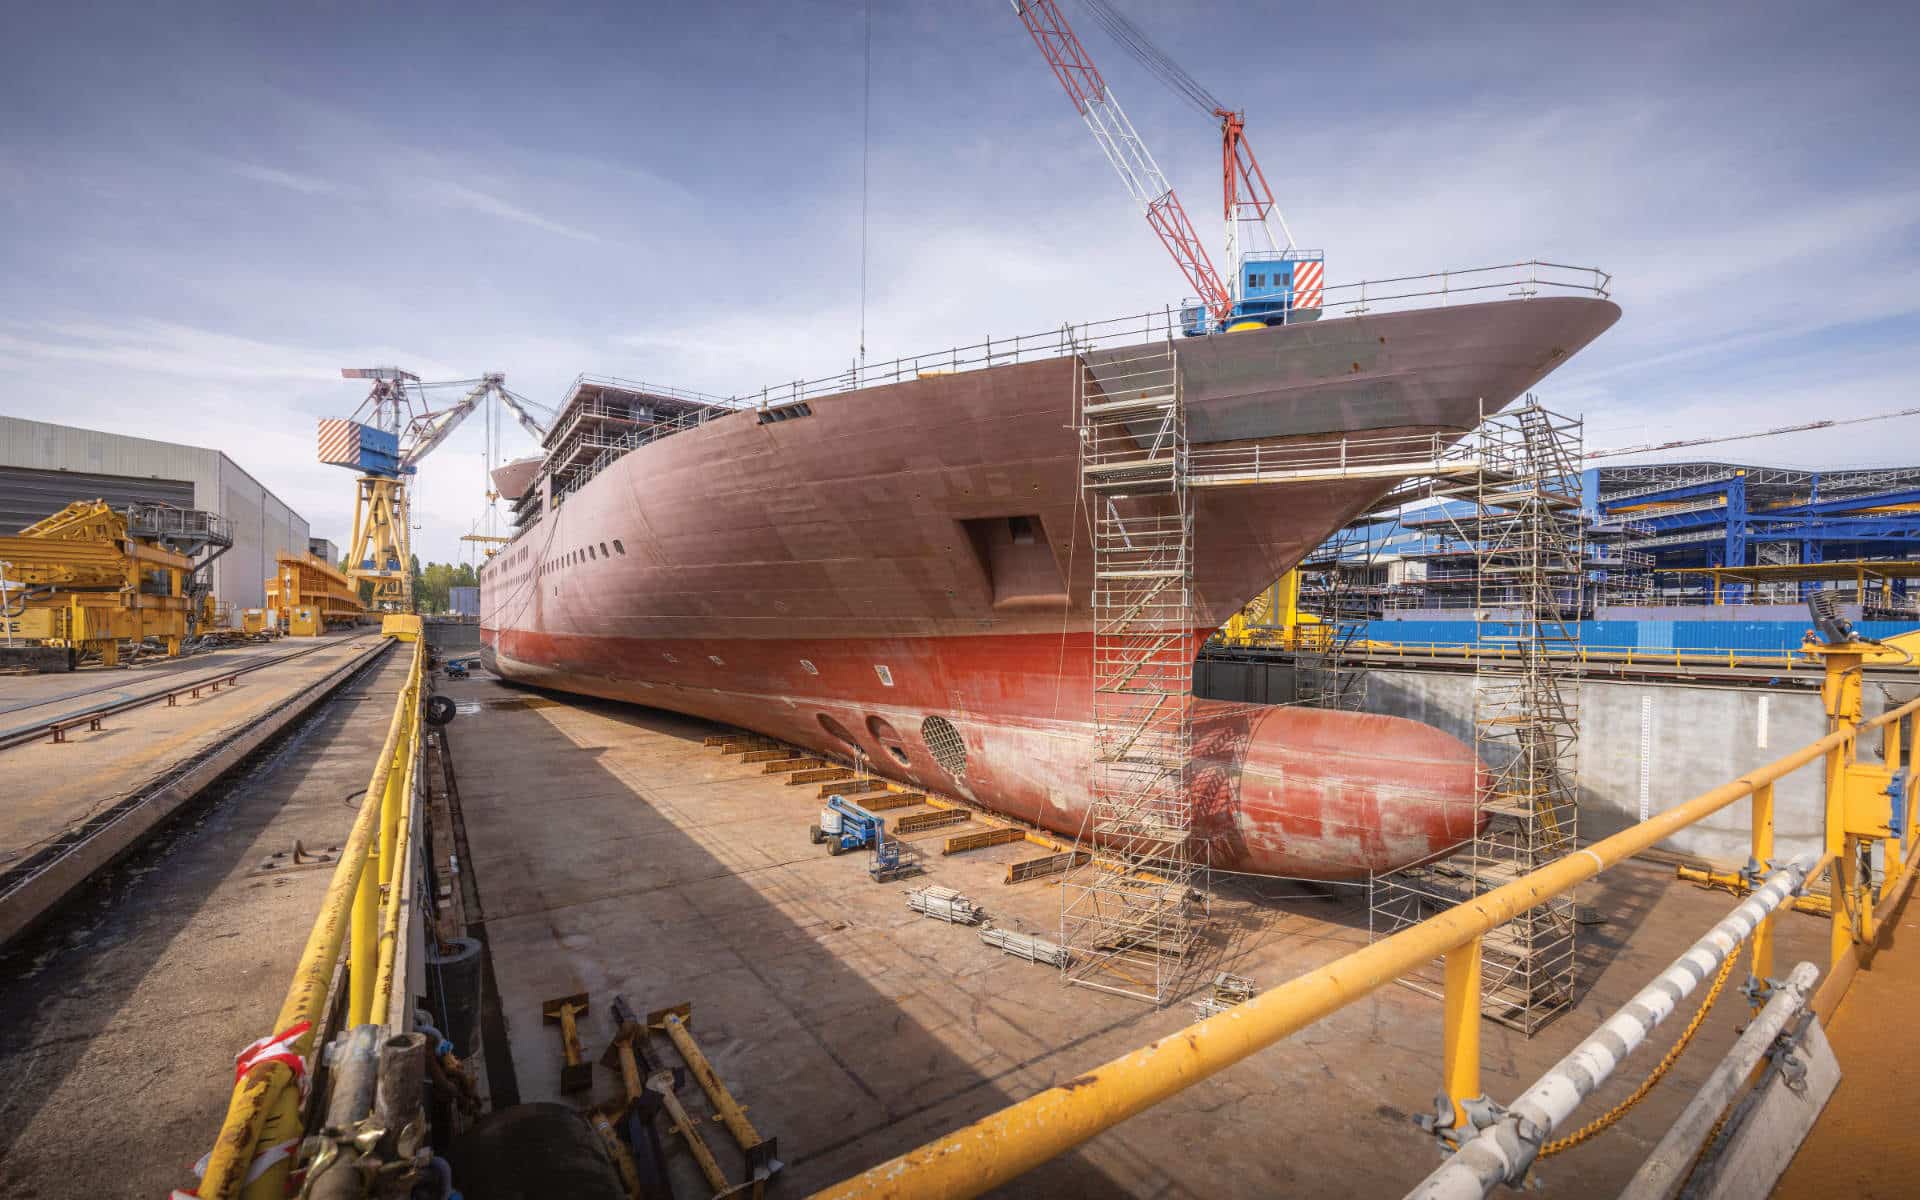 A keel laying ceremony marked the constriction phase of Queen Anne.